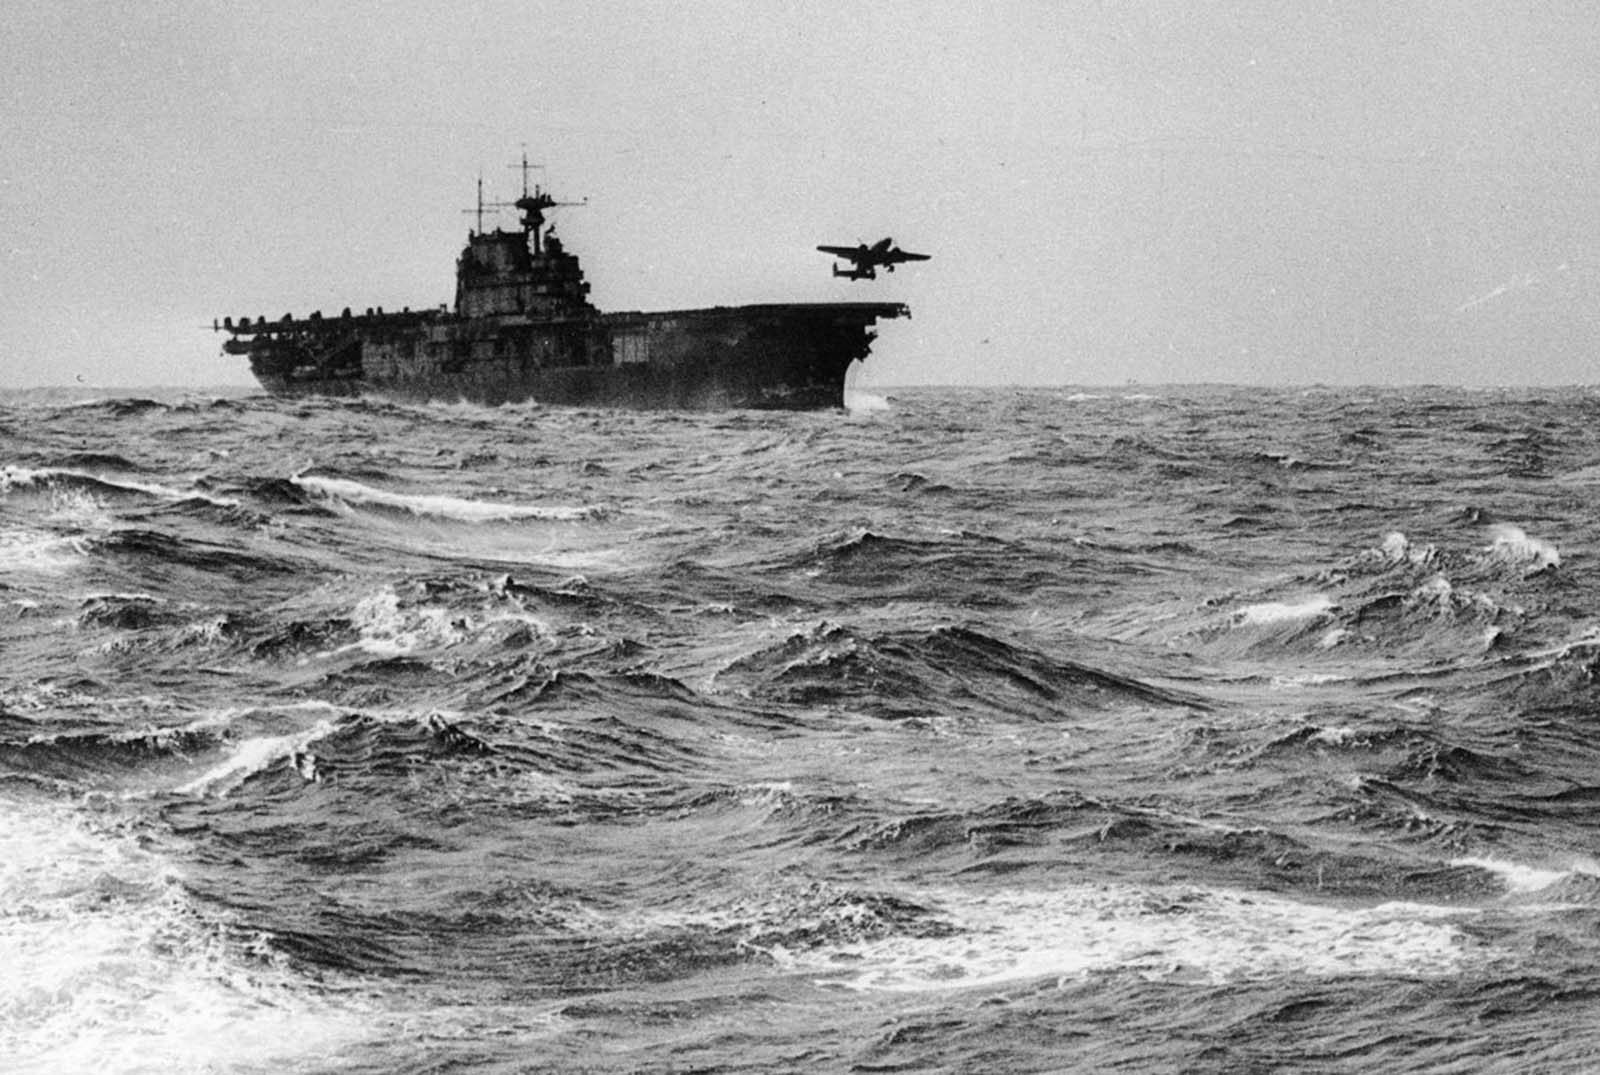 A U.S. Army Air Force B-25B Mitchell medium bomber, one of sixteen involved in the mission, takes off from the flight deck of the USS Hornet for an air raid on the Japanese Home Islands, on April 18, 1942. The attack, later known as the Doolittle Raid, inflicted limited damage, but gave a huge boost to American morale after the attacks on Pearl Harbor months earlier.